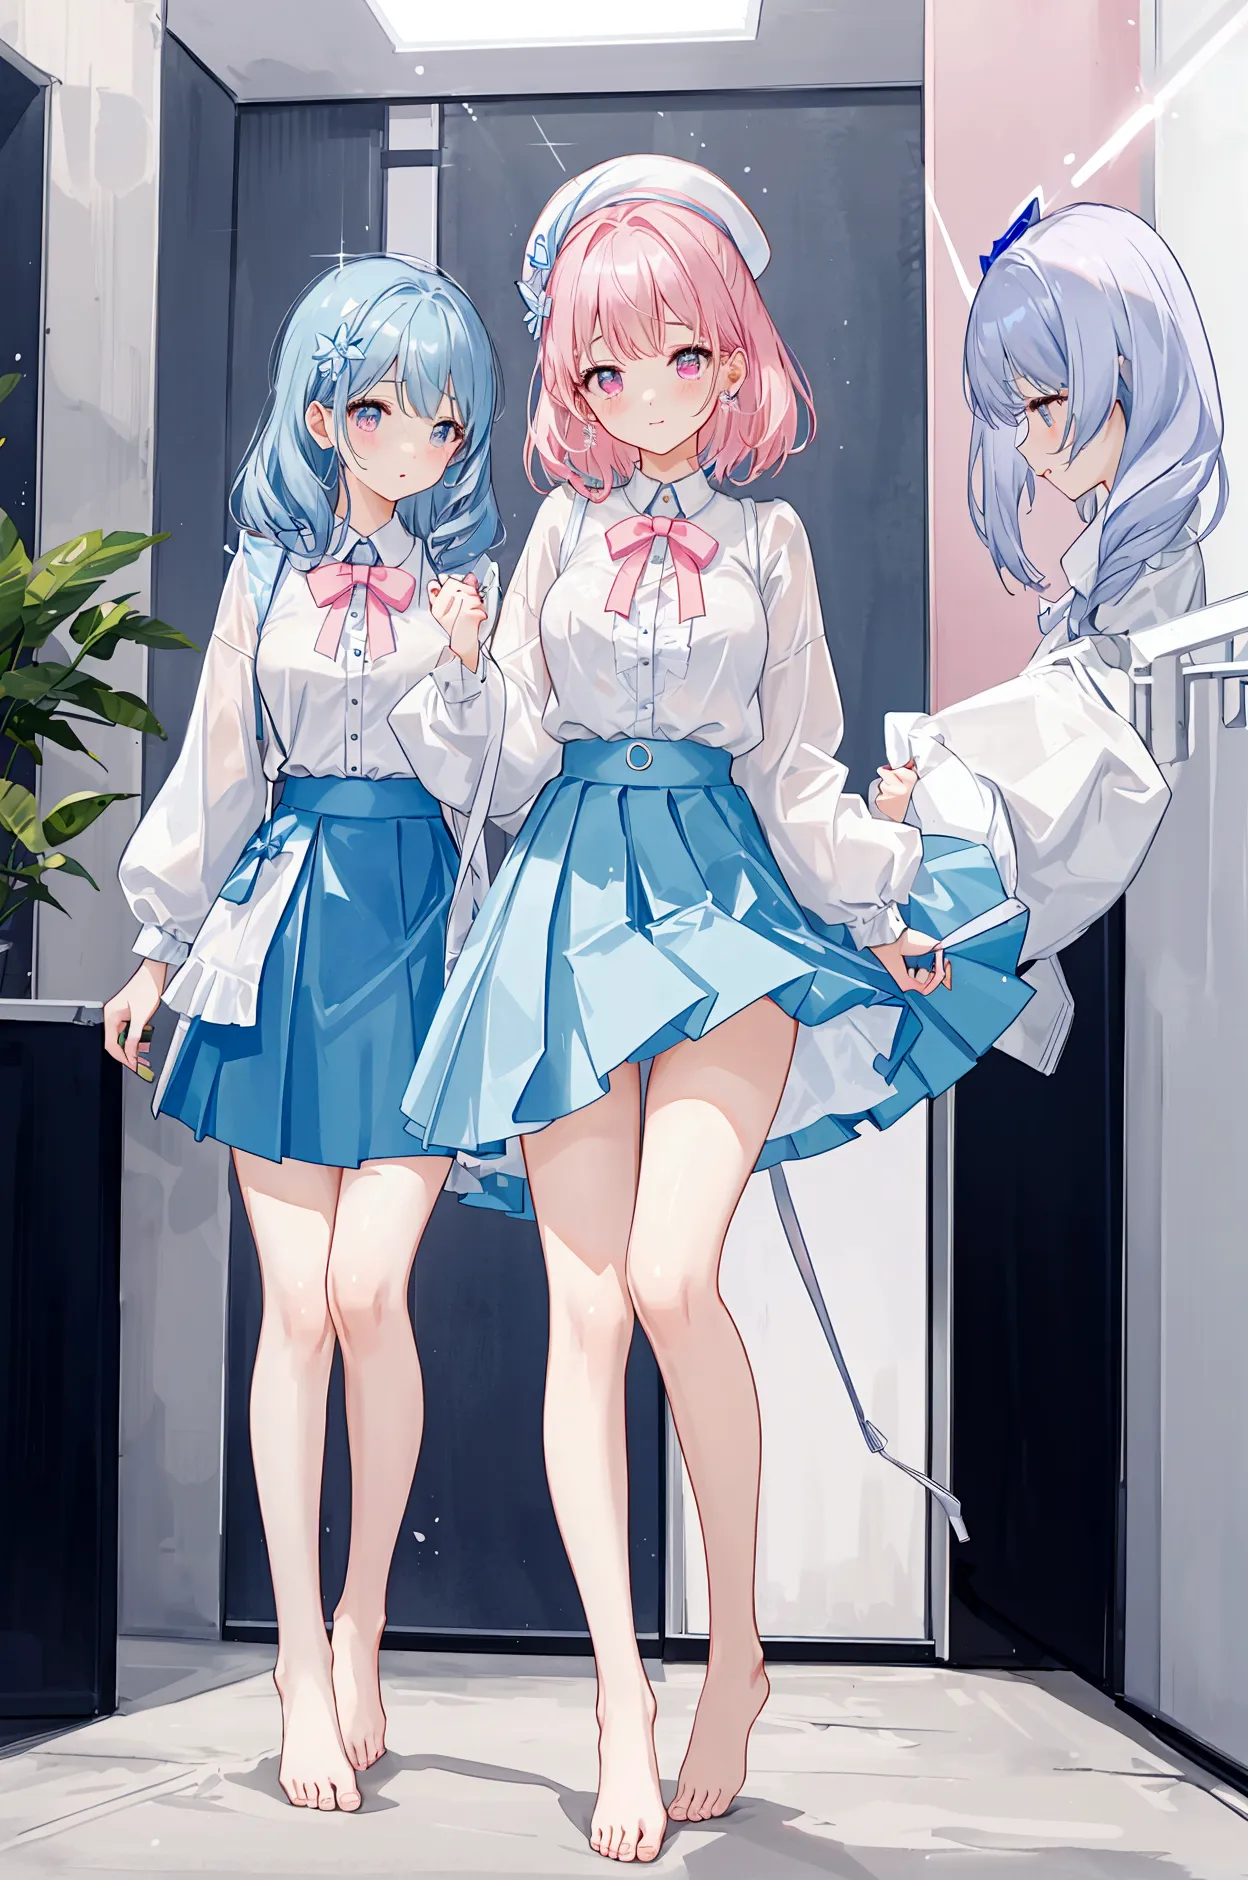 Three sisters of different heights、A cute white blouse with a cute light blue bra showing through it、Cute pink flare skirt、Light...